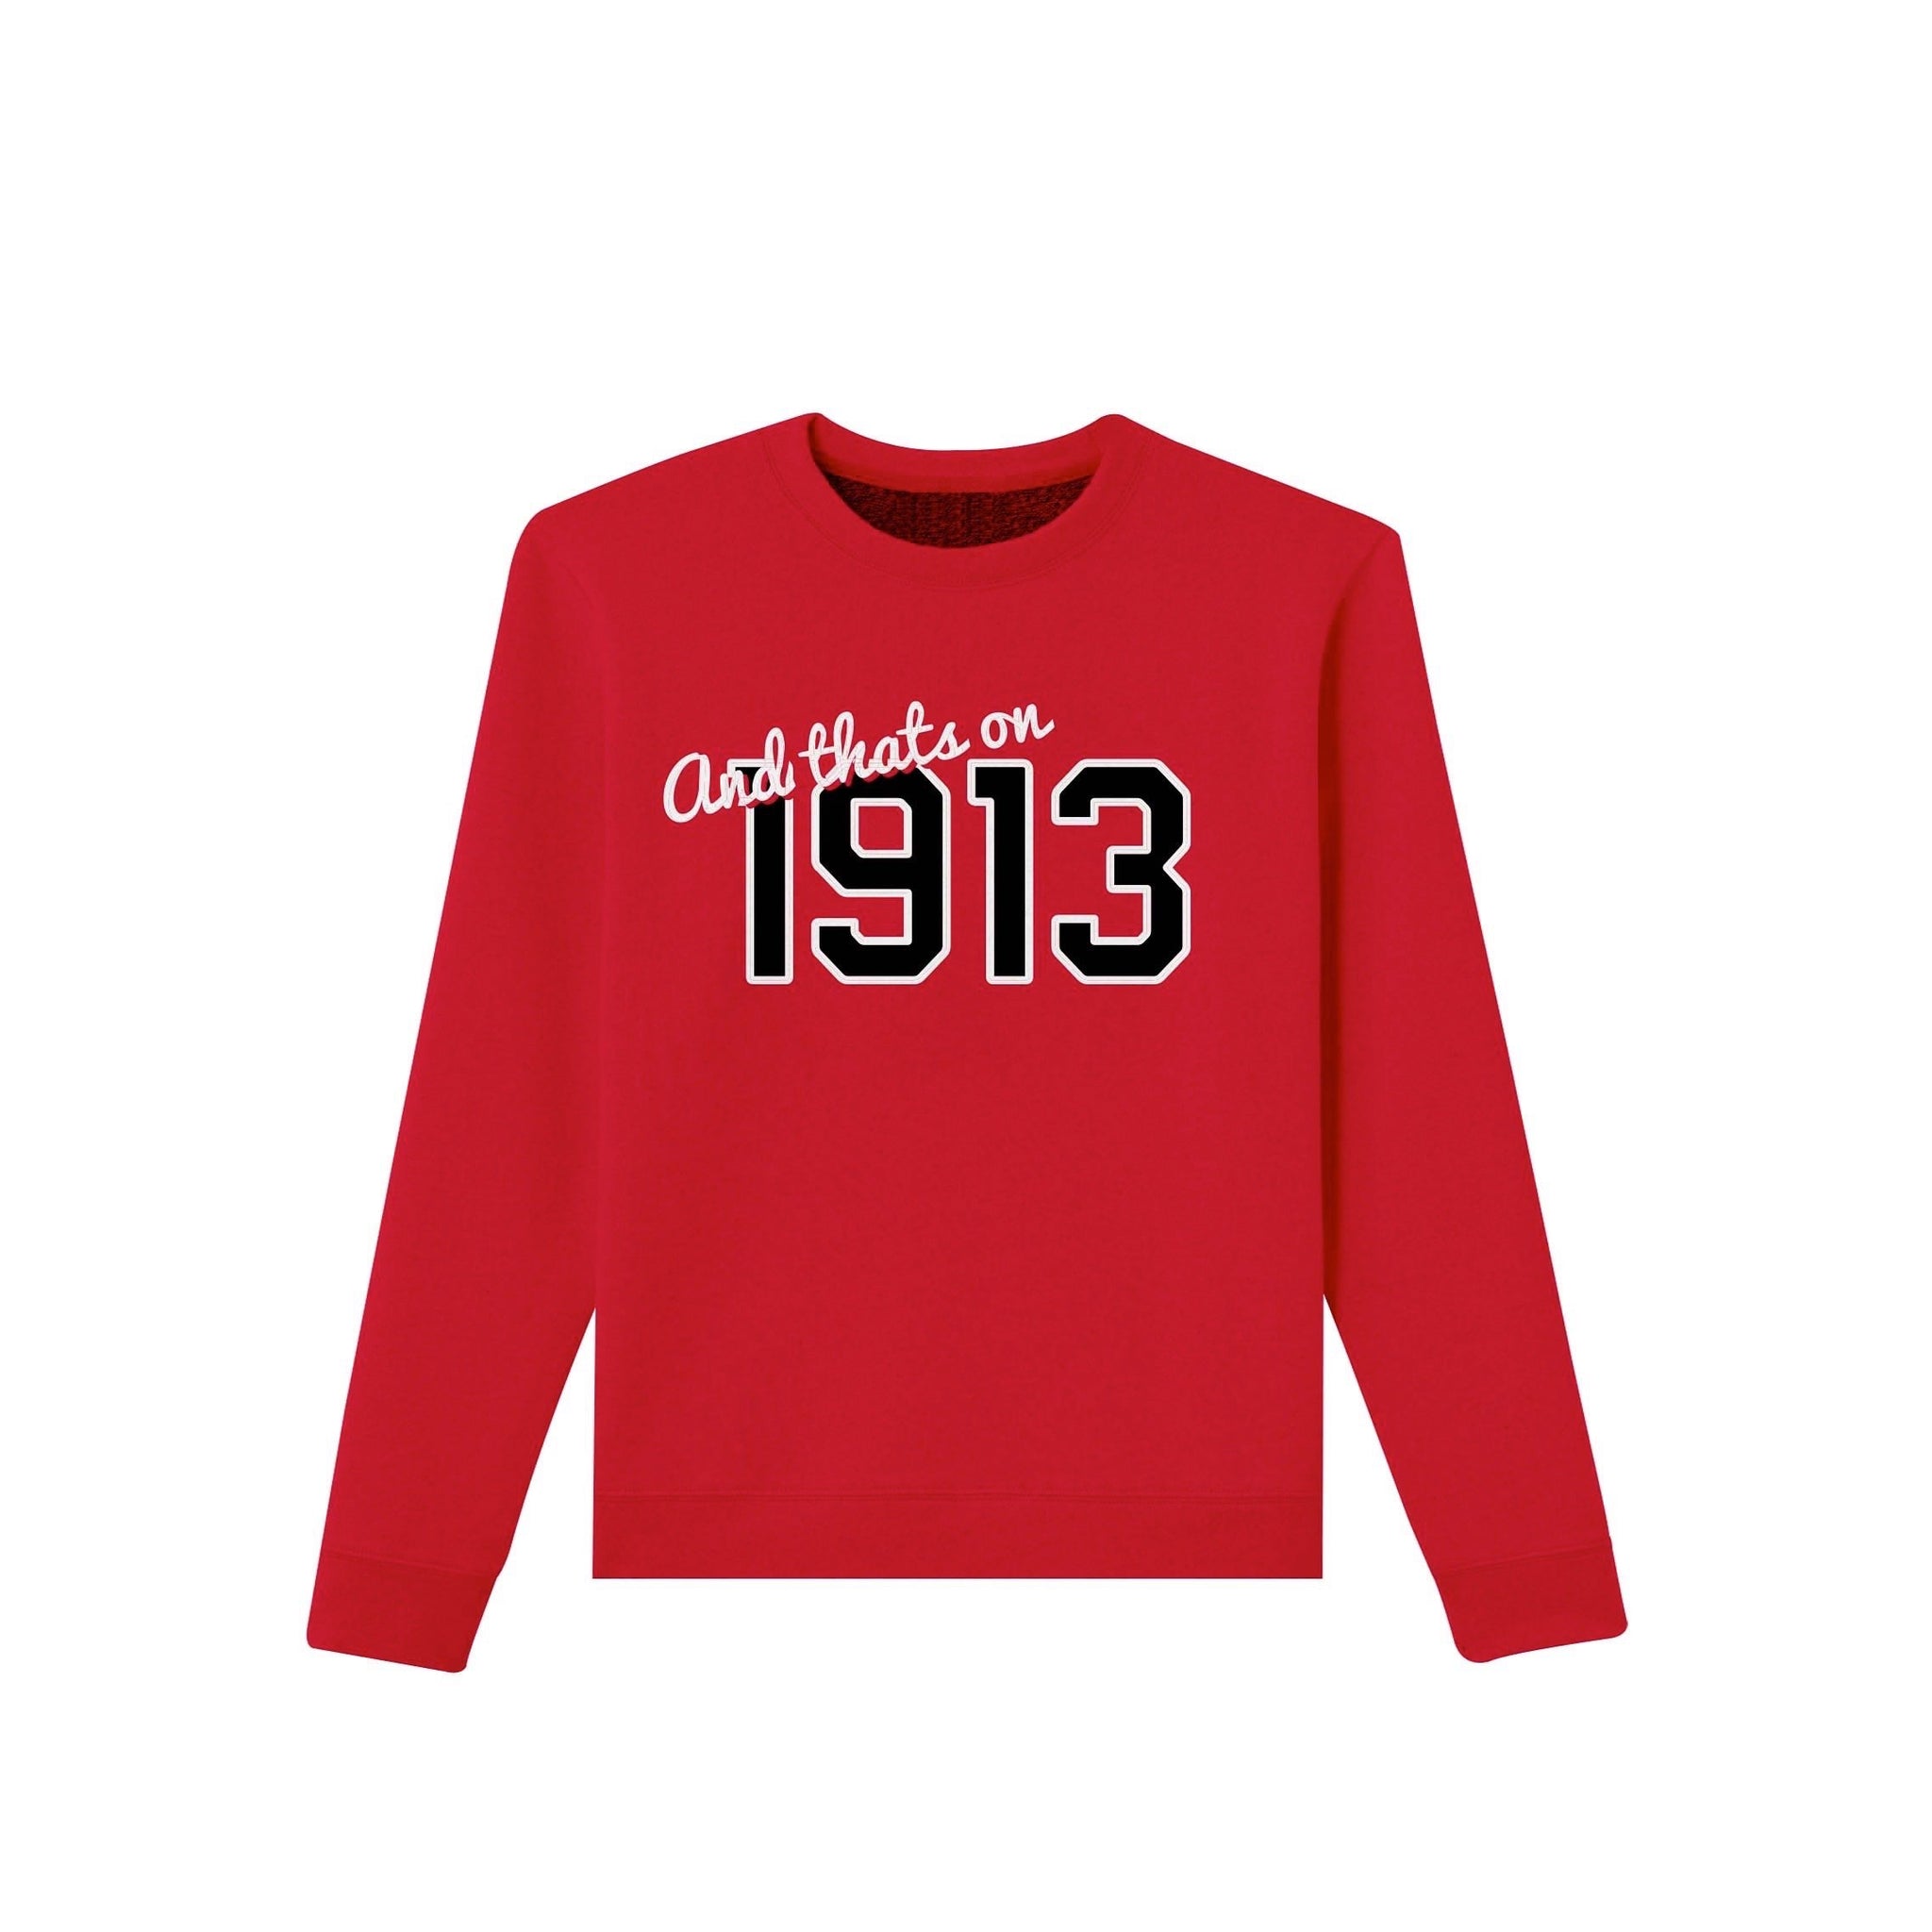 And That's On 1913 Apparel